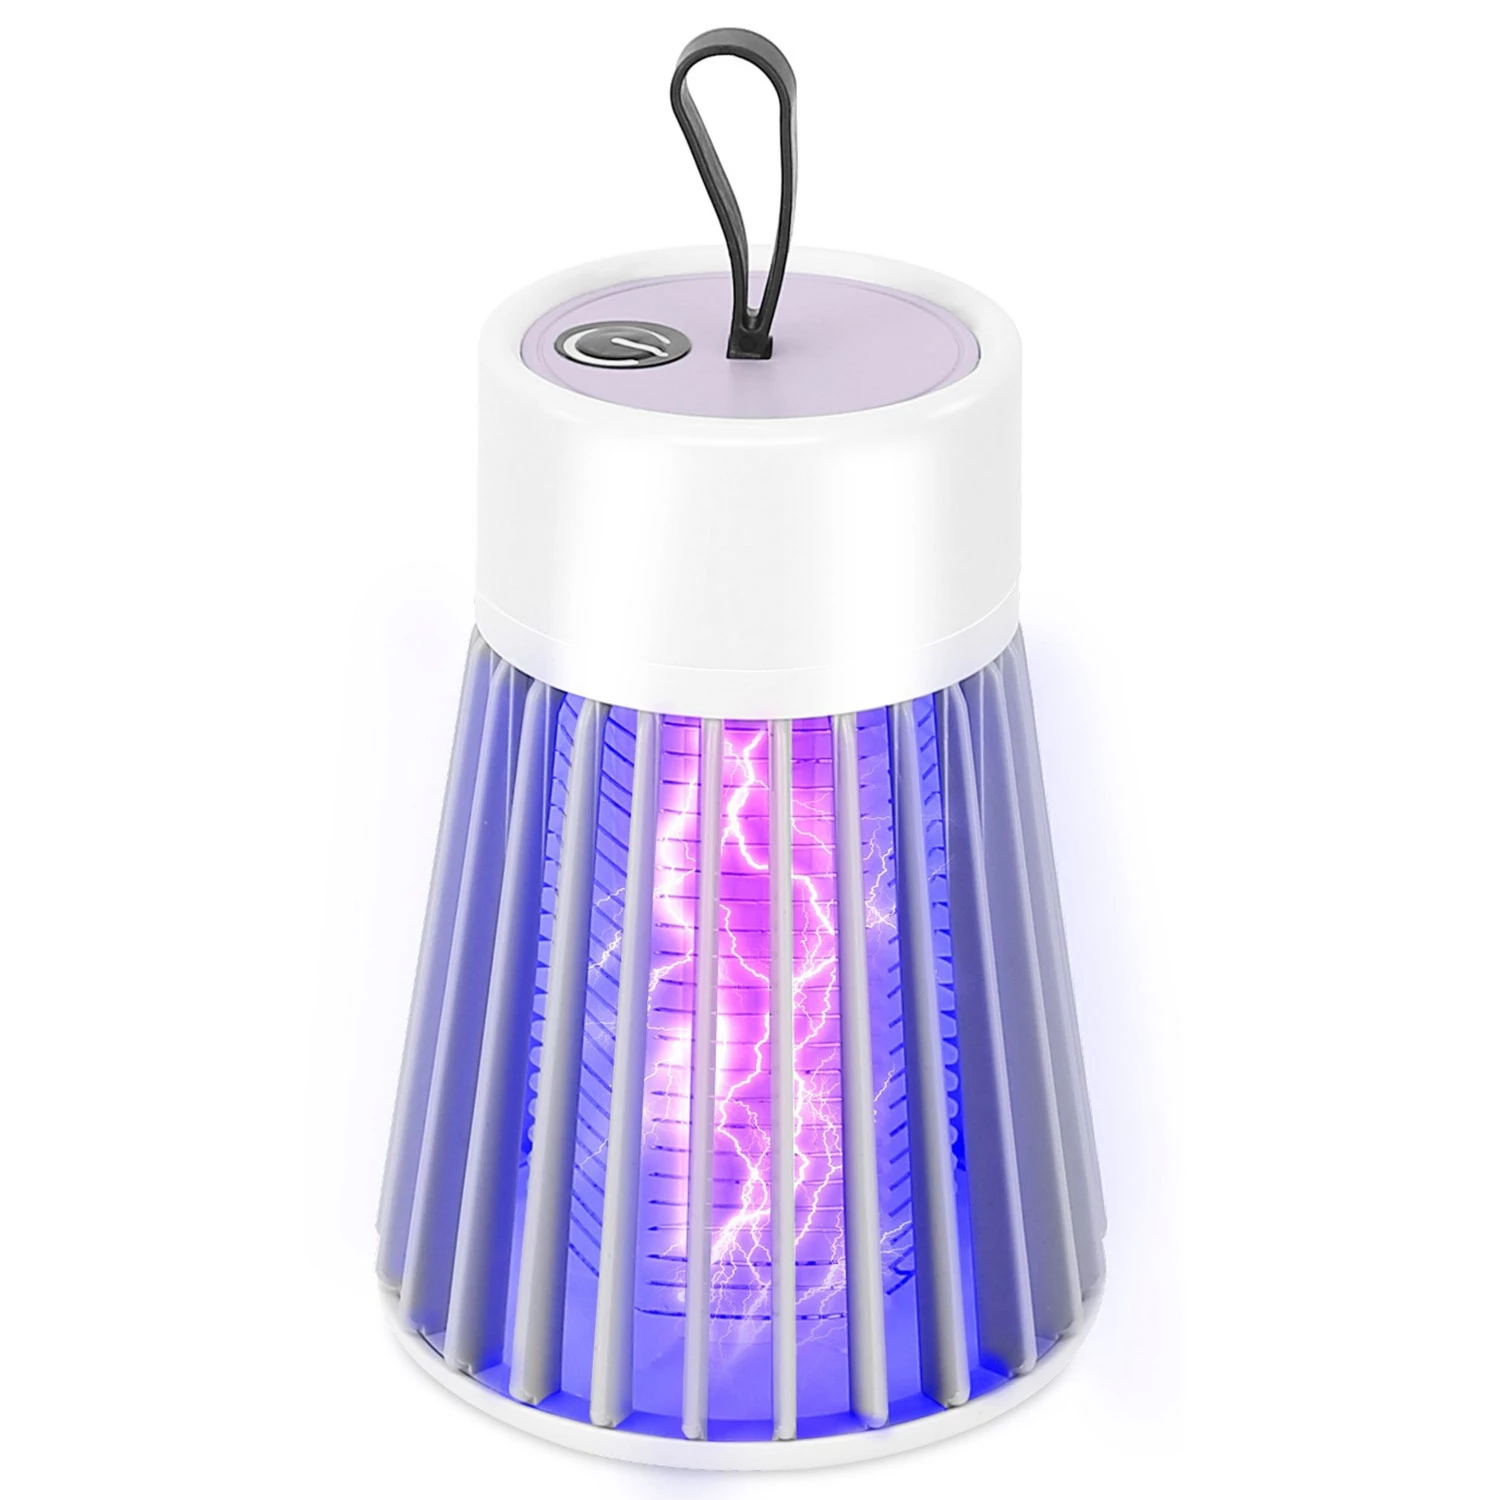 Portable Electric Bug Zapper - LED Light Insect Killer, Fly Trap - Compact And Effective